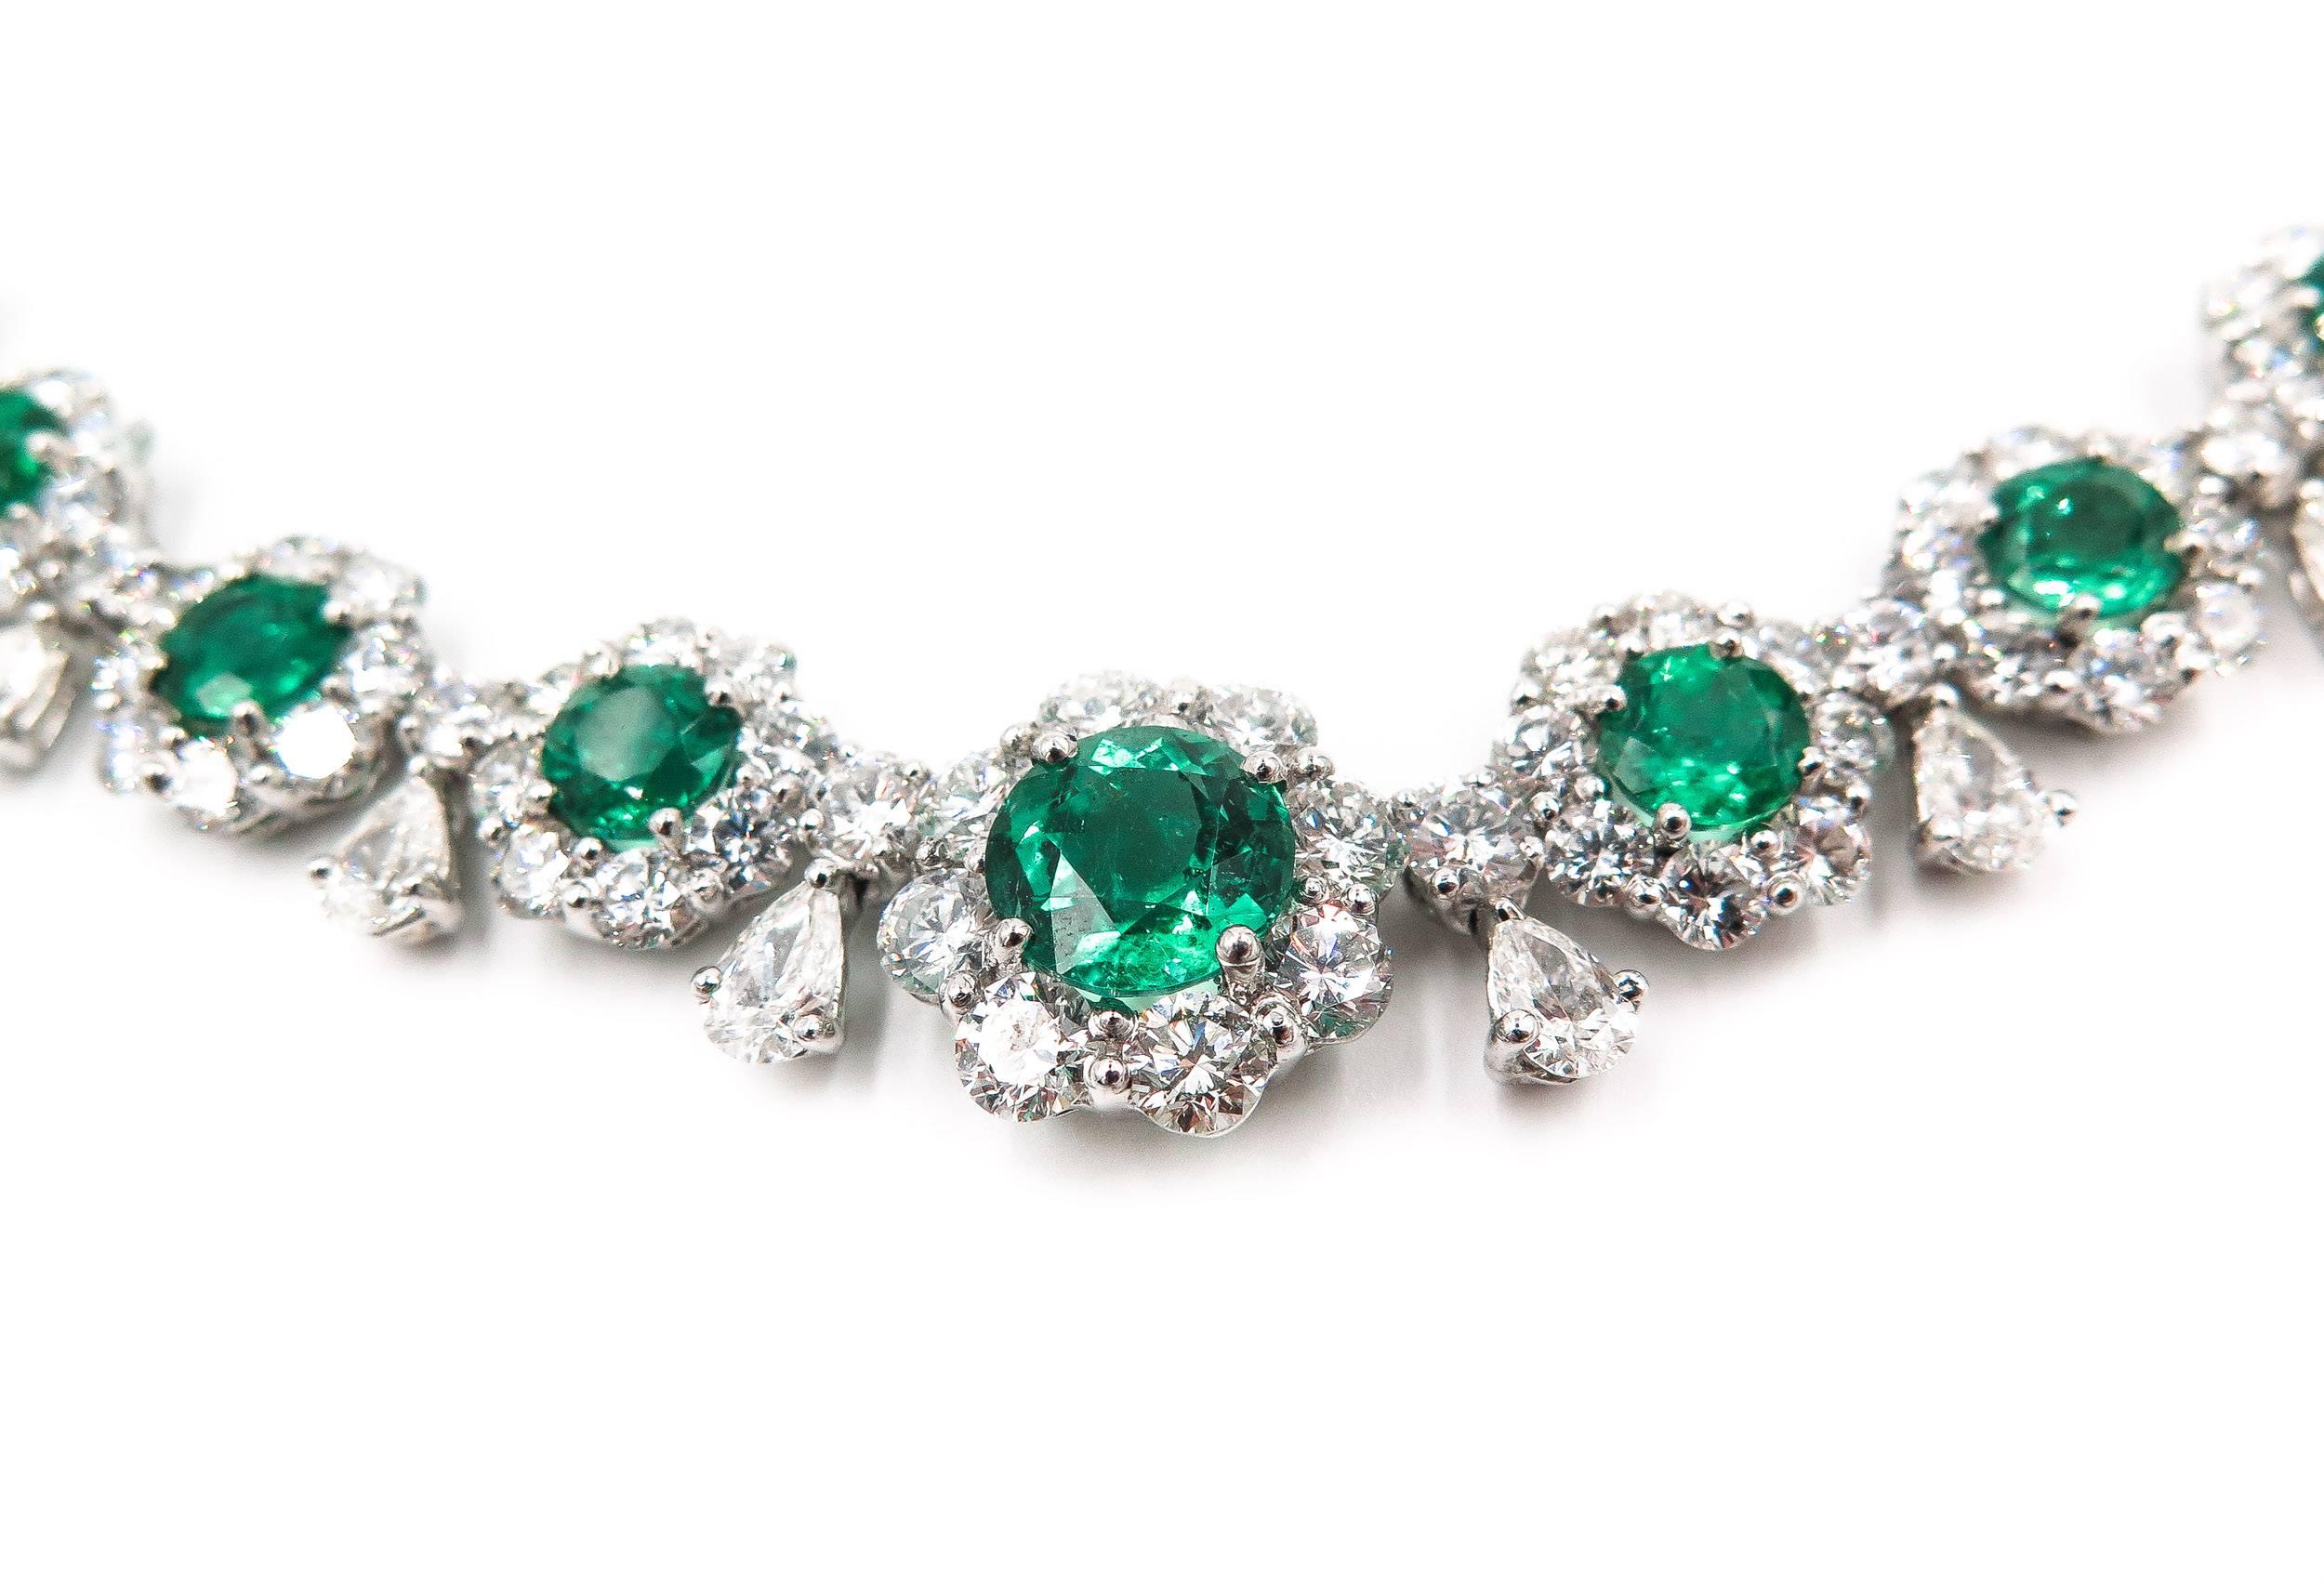 A remarkable line of graduated round cut emeralds weighing 19.18 carats are the main focus of this stunning necklace.
Set in platinum, these emerald’s deep green mesmerizes any and all lookers.
The soft movement is the result of an idea through